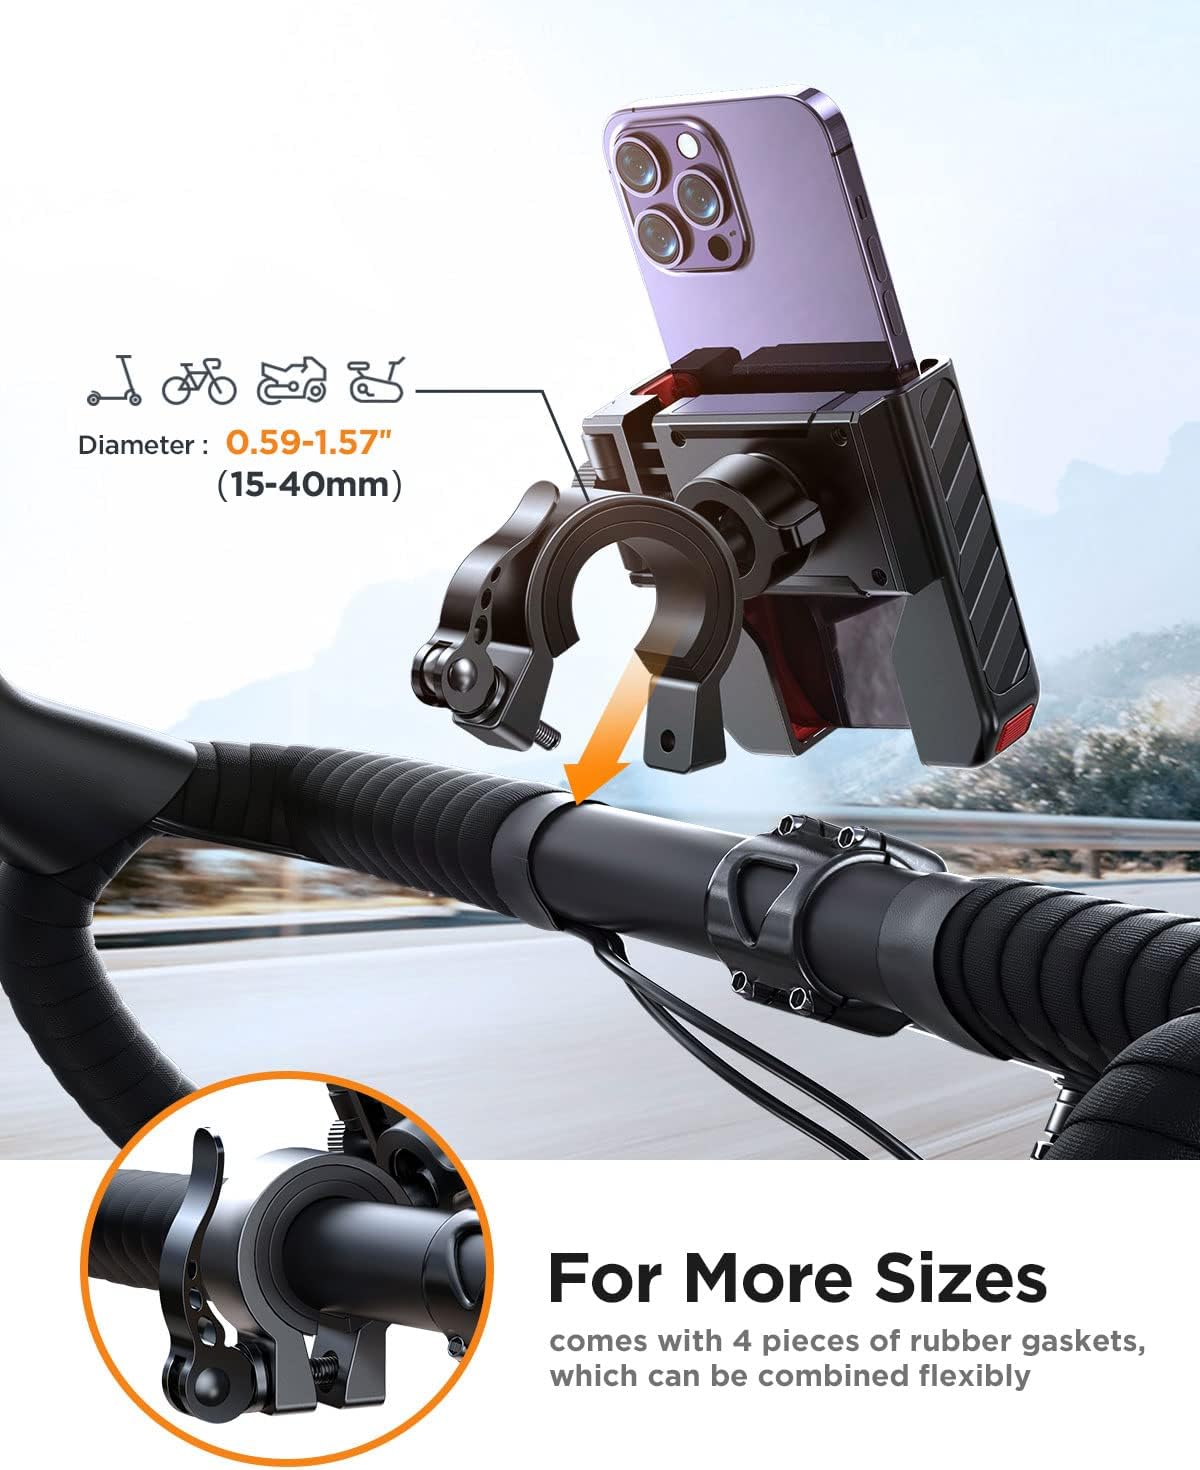 Comments on JOYROOM Motorcycle Bike Phone Mount Holder: Bicycle Handlebar Cell Phone Mount - Stroller Scooter Phone Clip